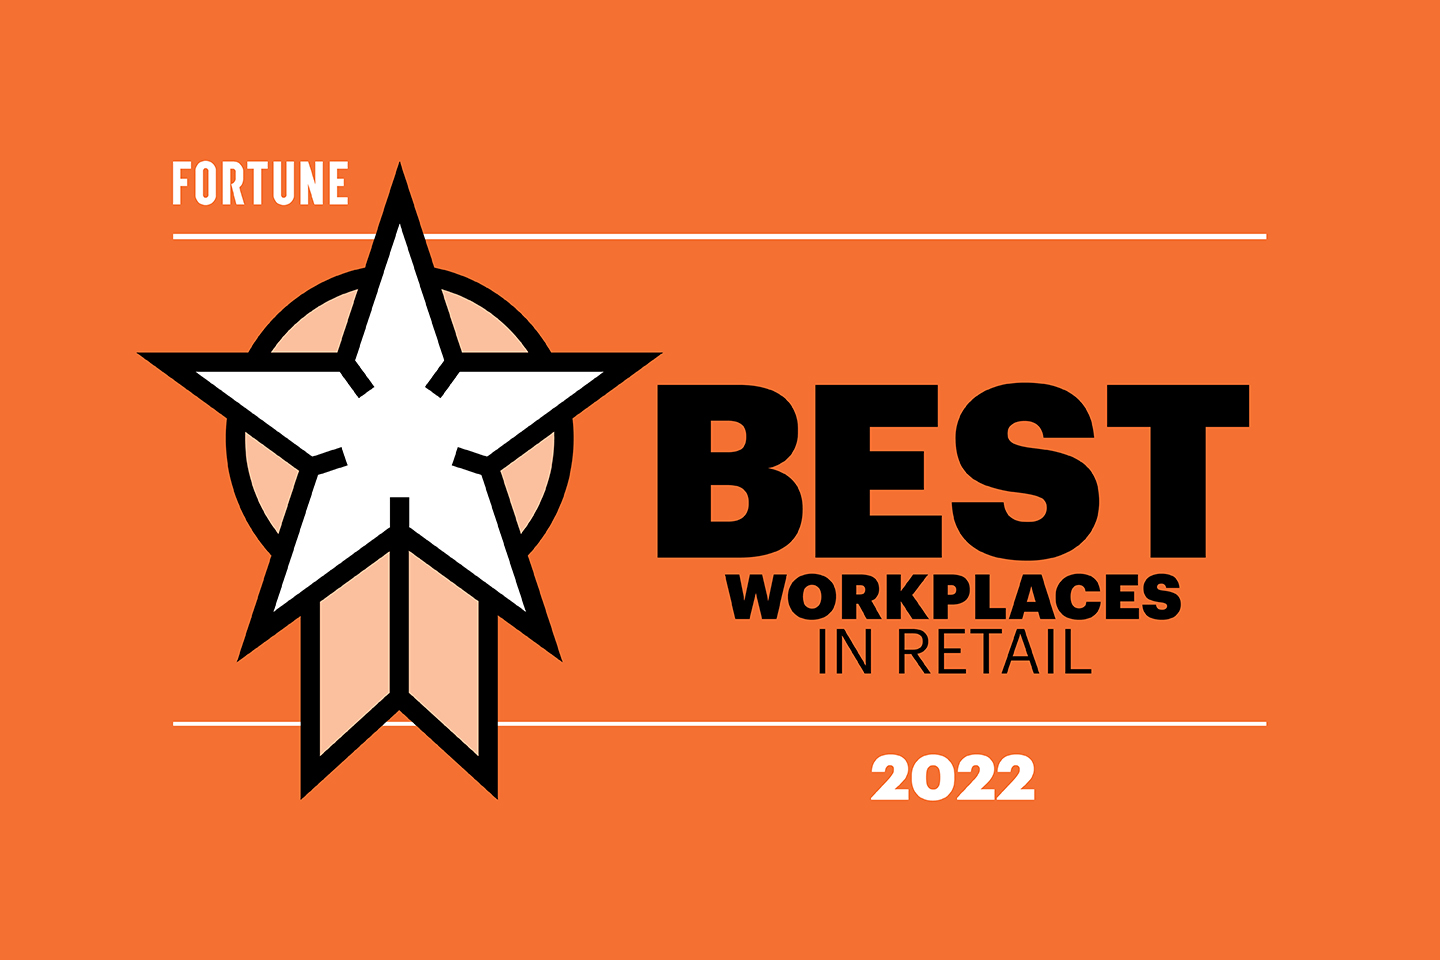 10 Best Small and Medium Workplaces in Retail